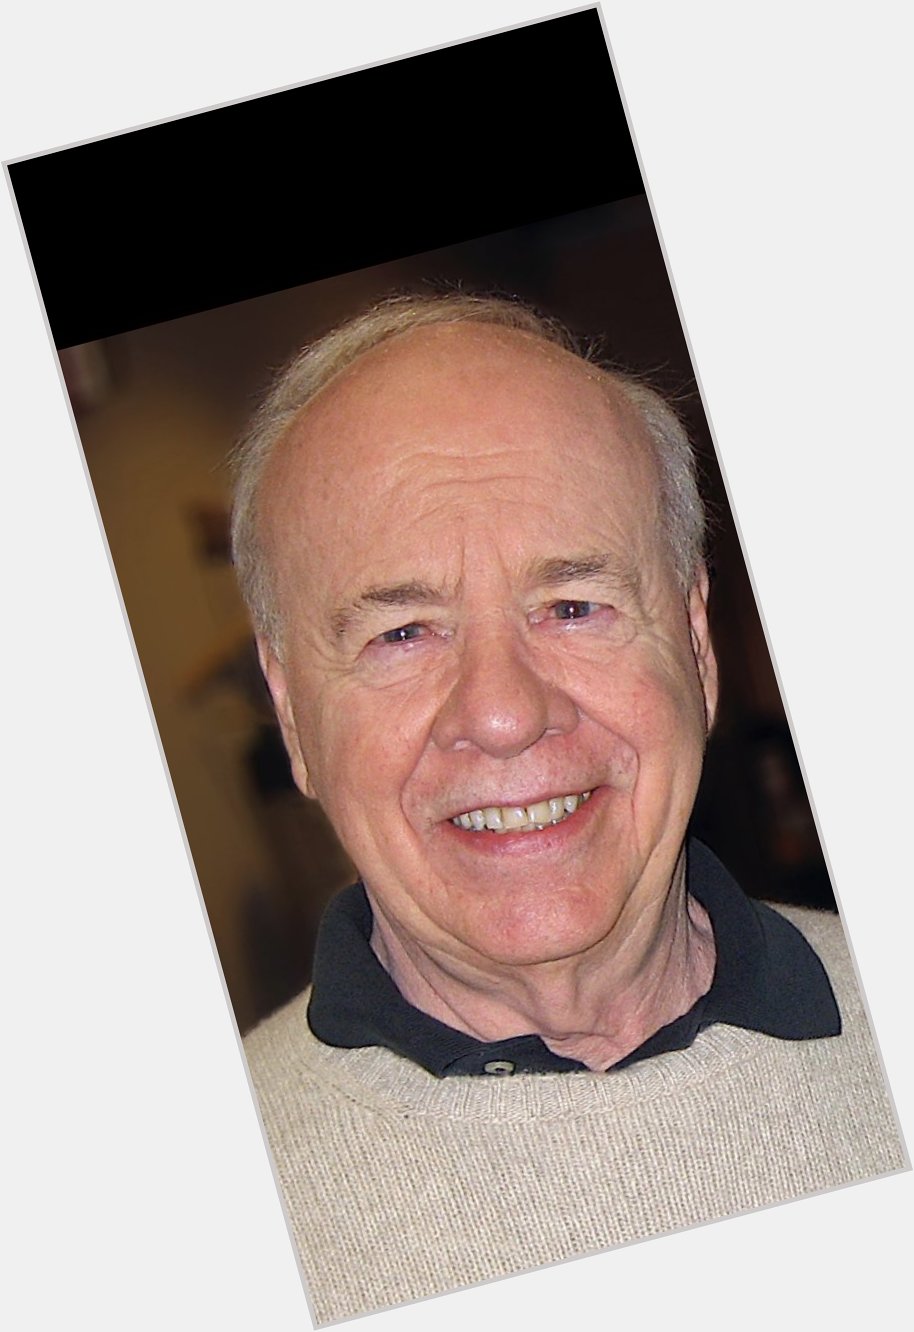 Happy heavenly birthday today to the late great Tim Conway.  